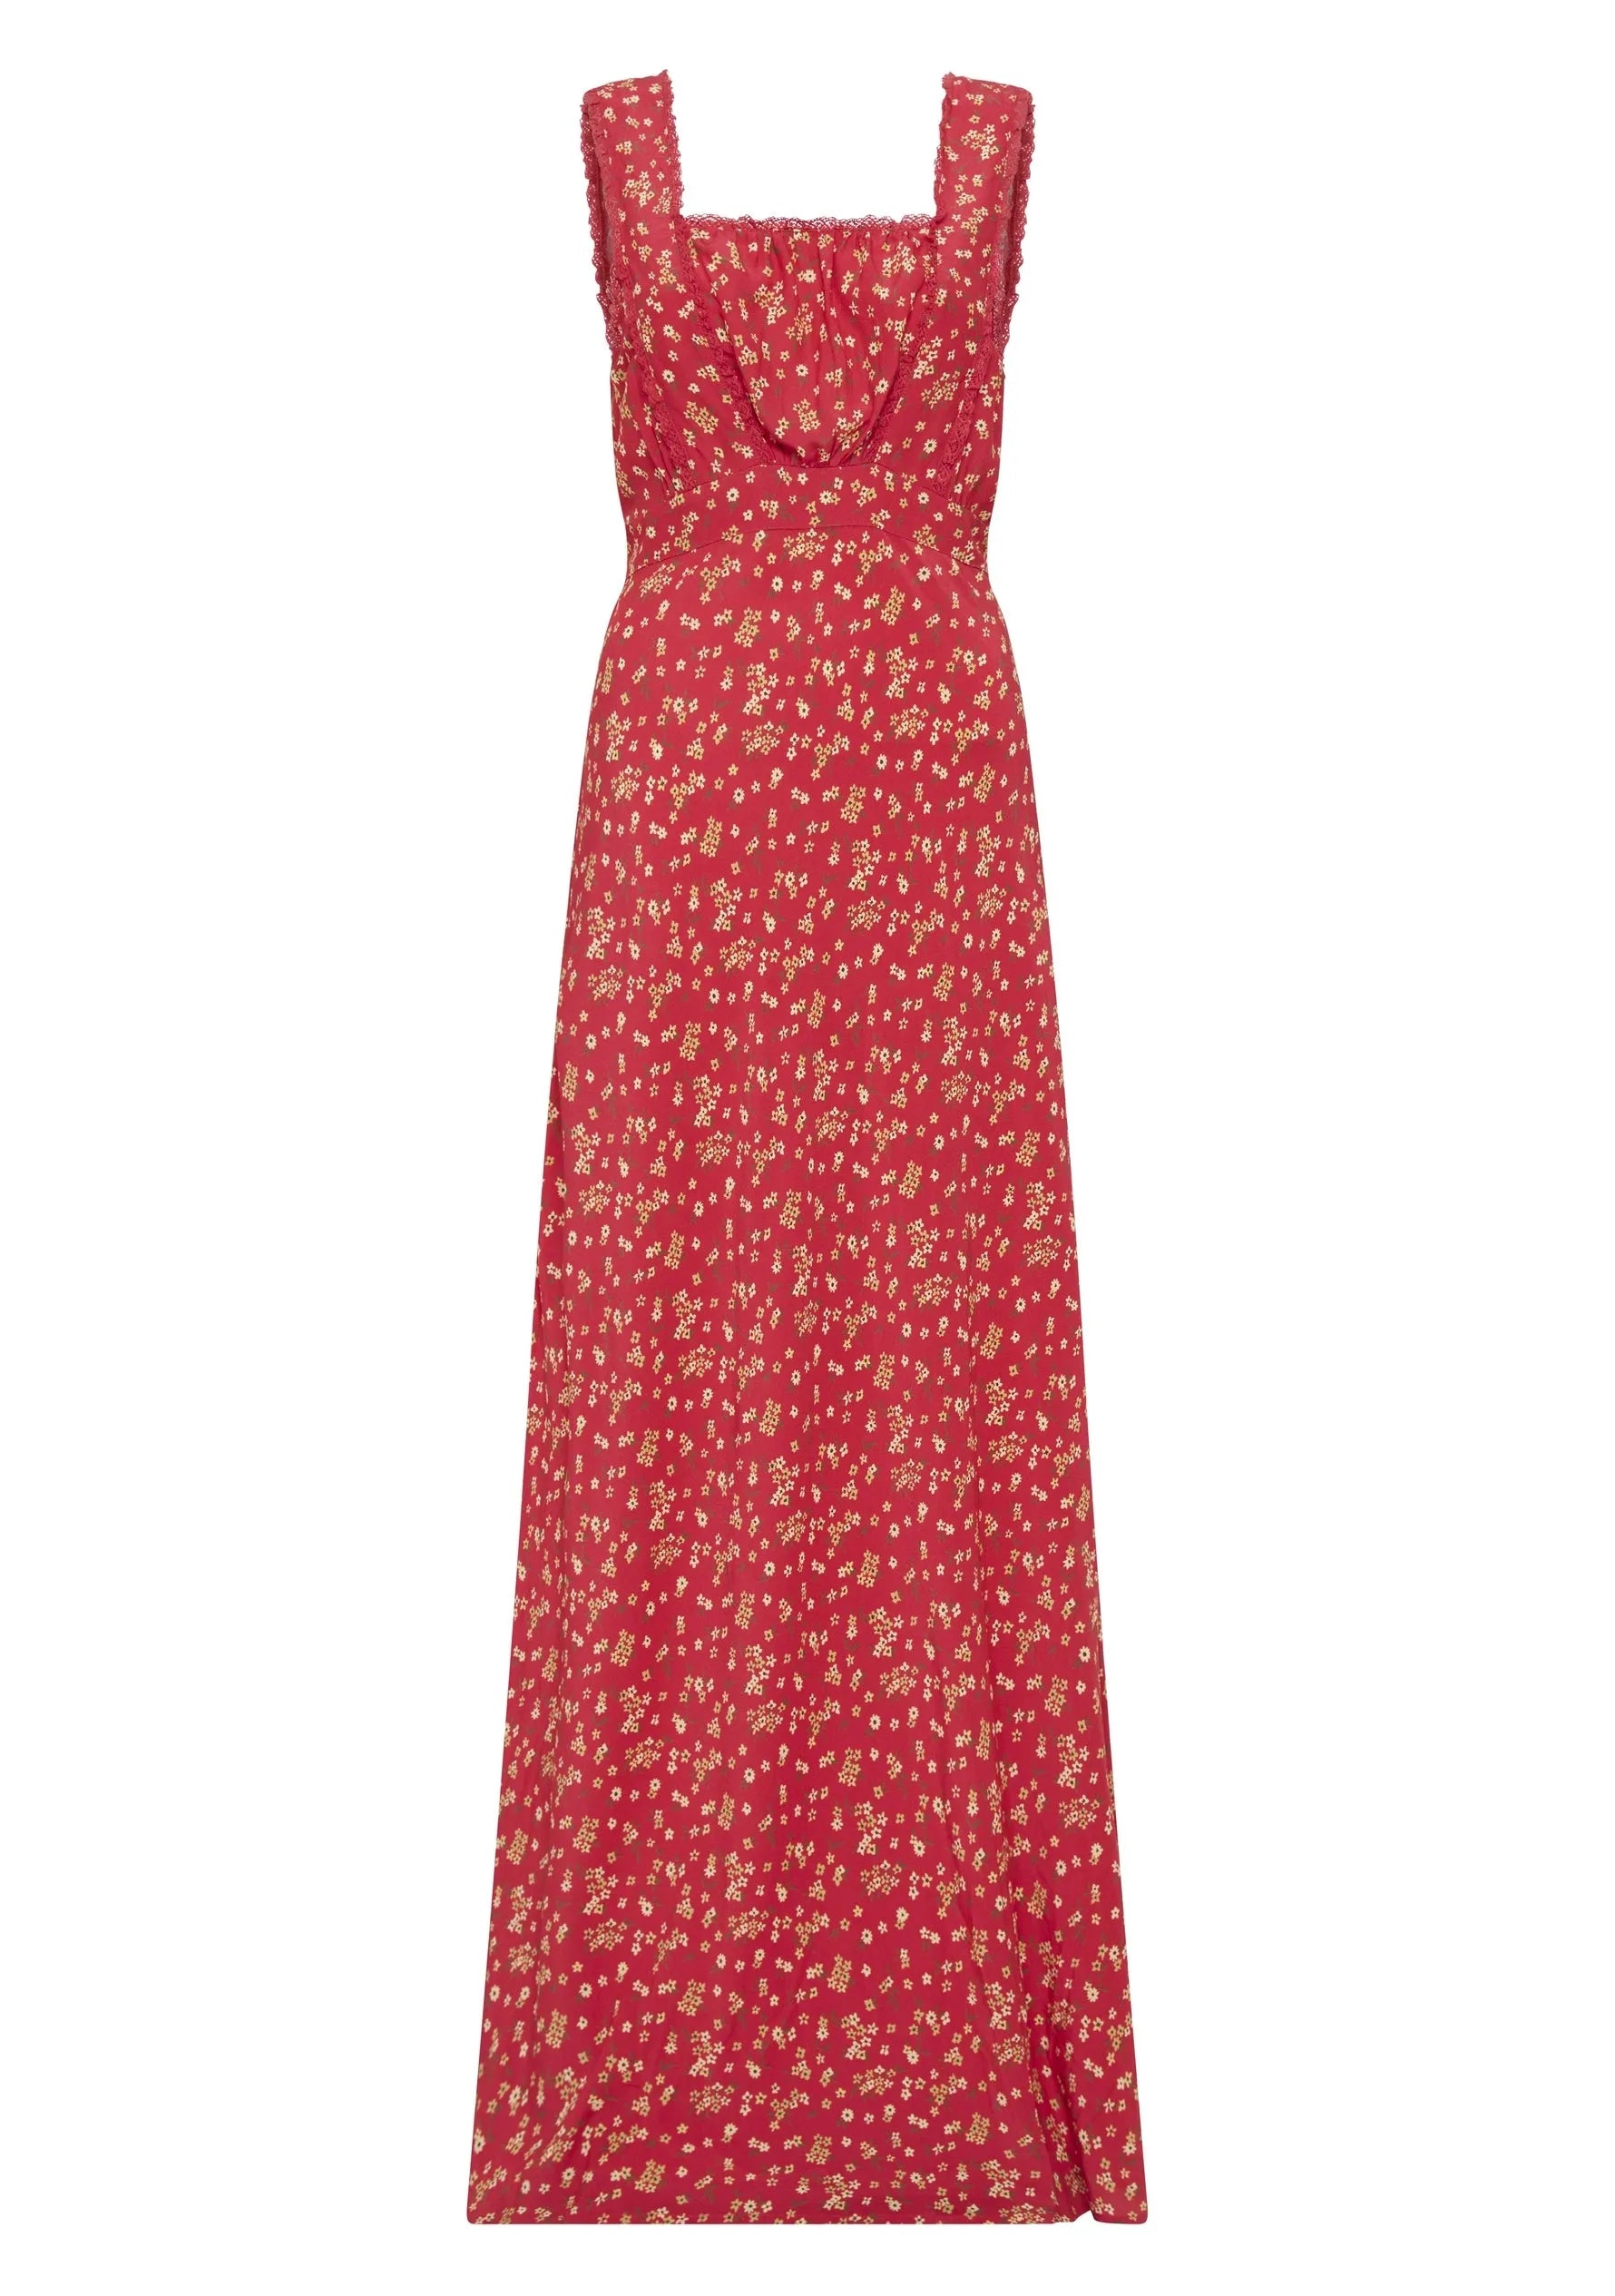 Auguste The Label | Delphina Maxi Dress - Berry